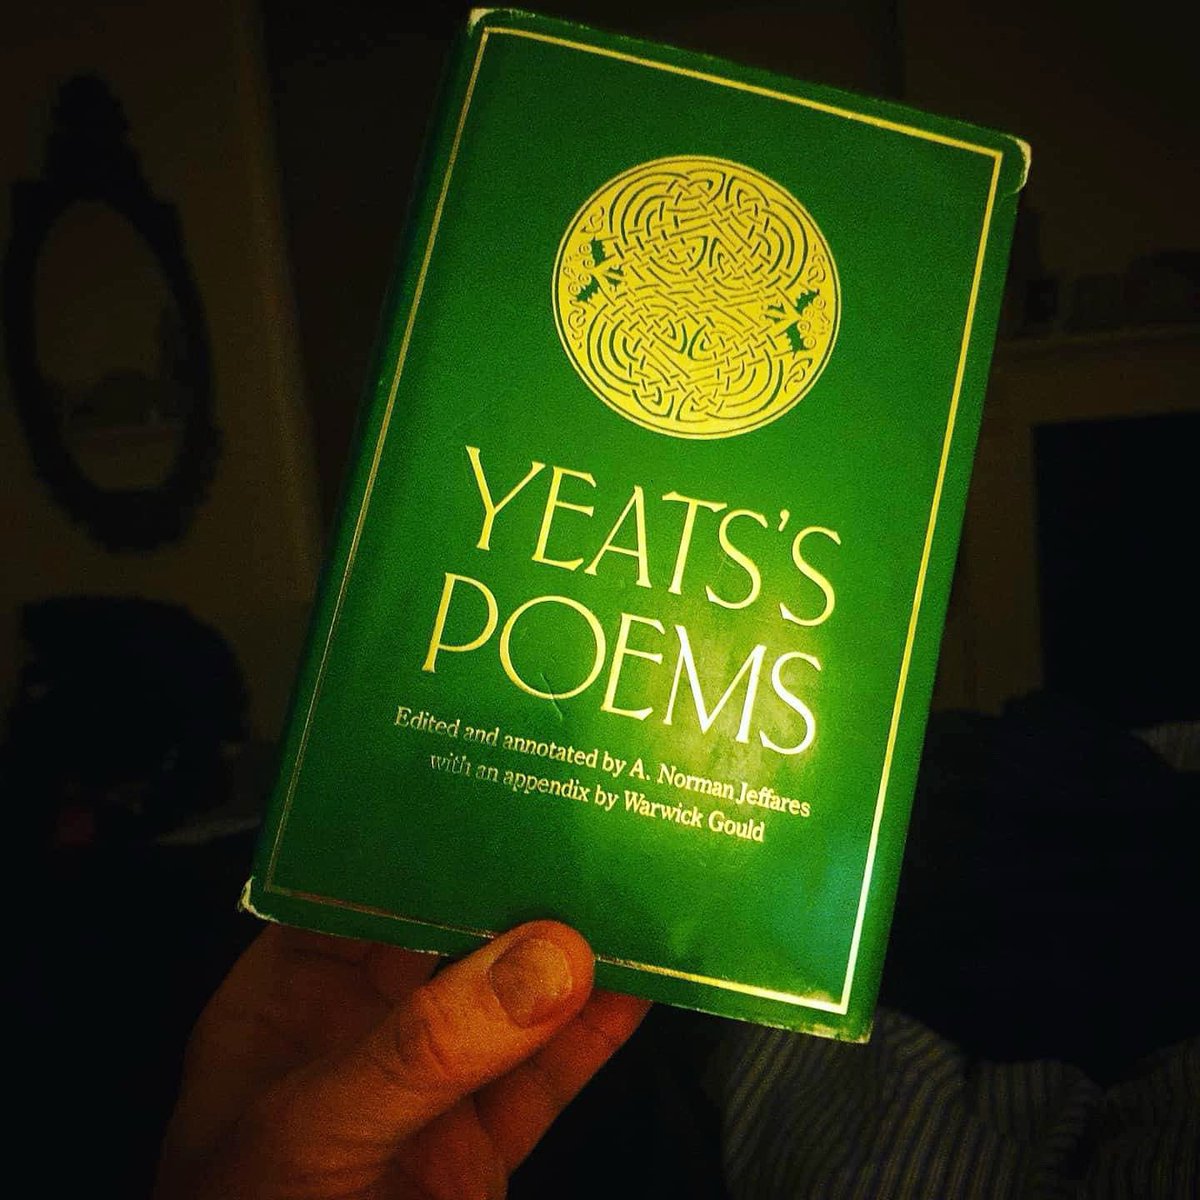 For me, the month of May brings it sun bedabbled poetry from my favourite scribe, W.B. Yeats.

Find time for poetry.

#wbyeats #thewanderingsofoisin #poetry